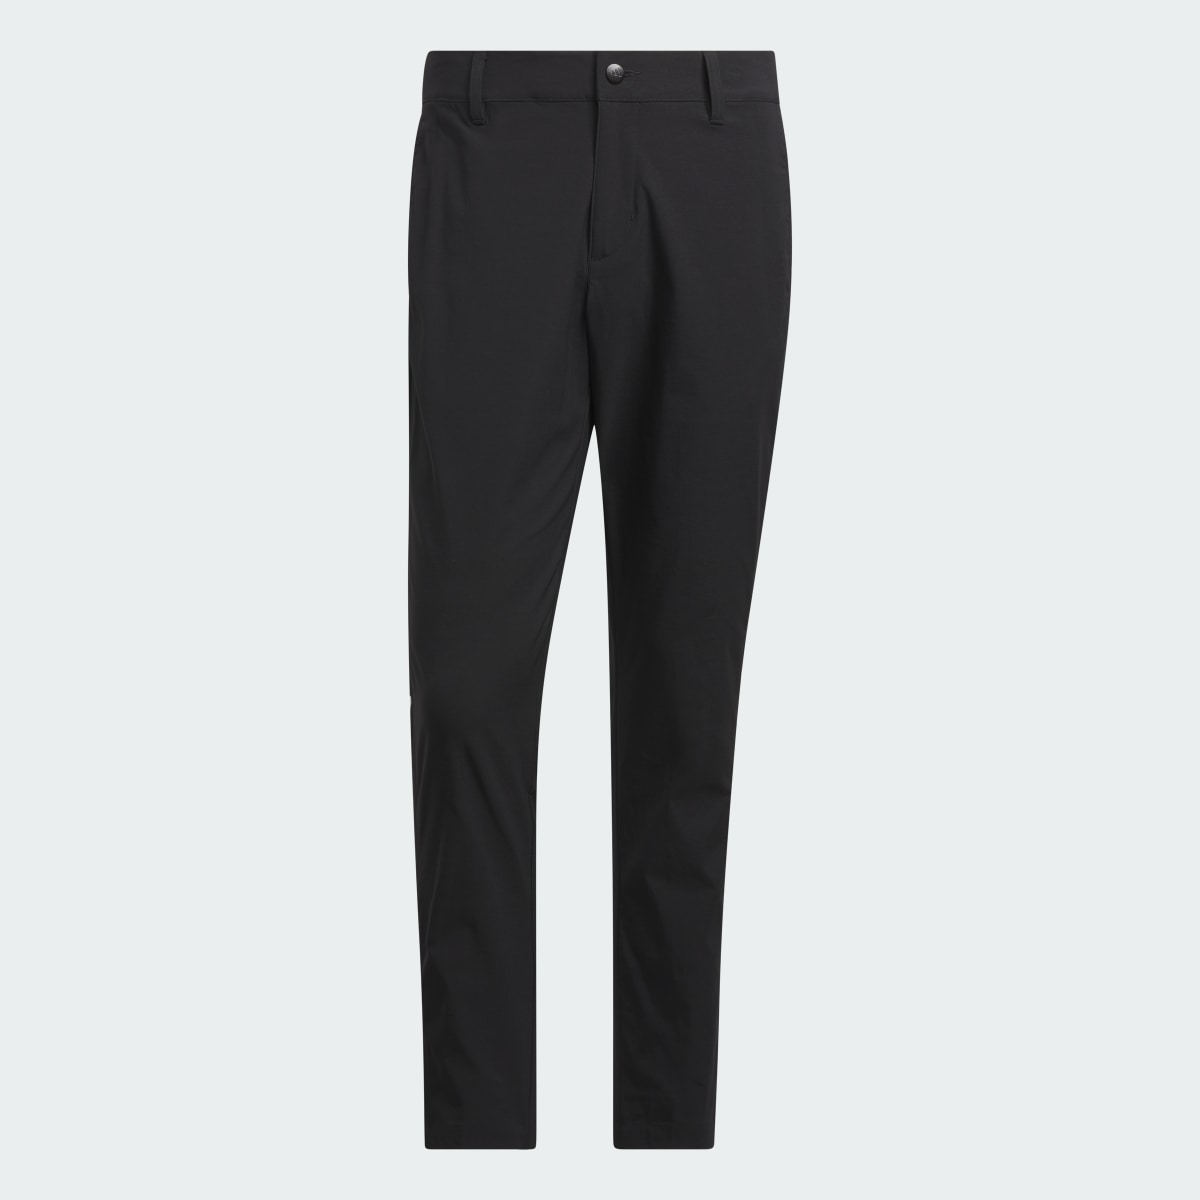 Adidas Ultimate365 Chino Trousers. 4